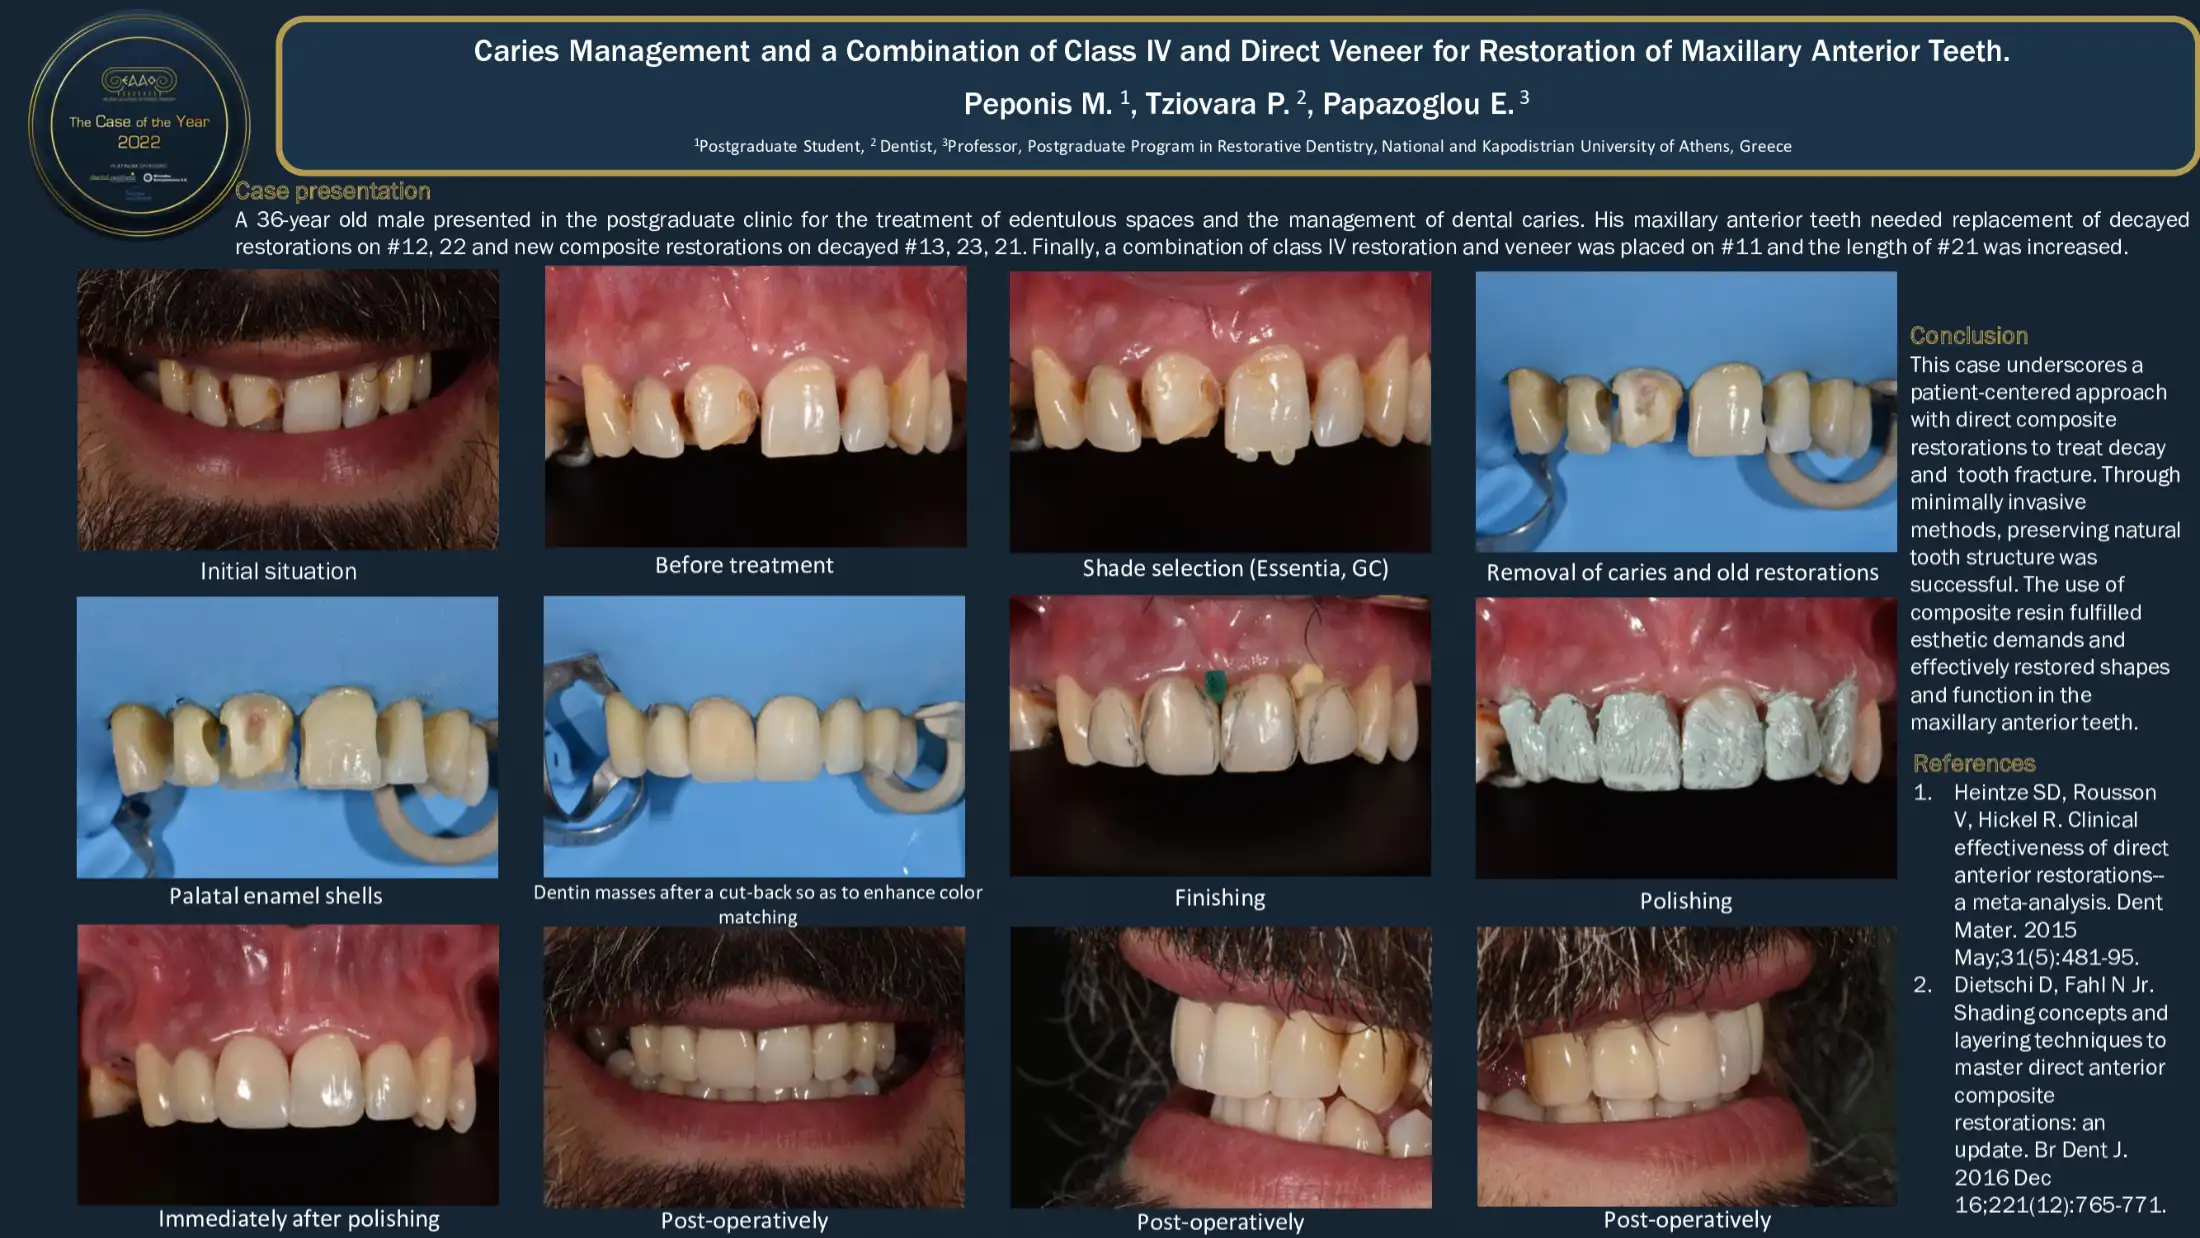 Caries Management and a Combination of Class IV and Direct Veneer for Restoration of Maxillary Anterior Teeth.